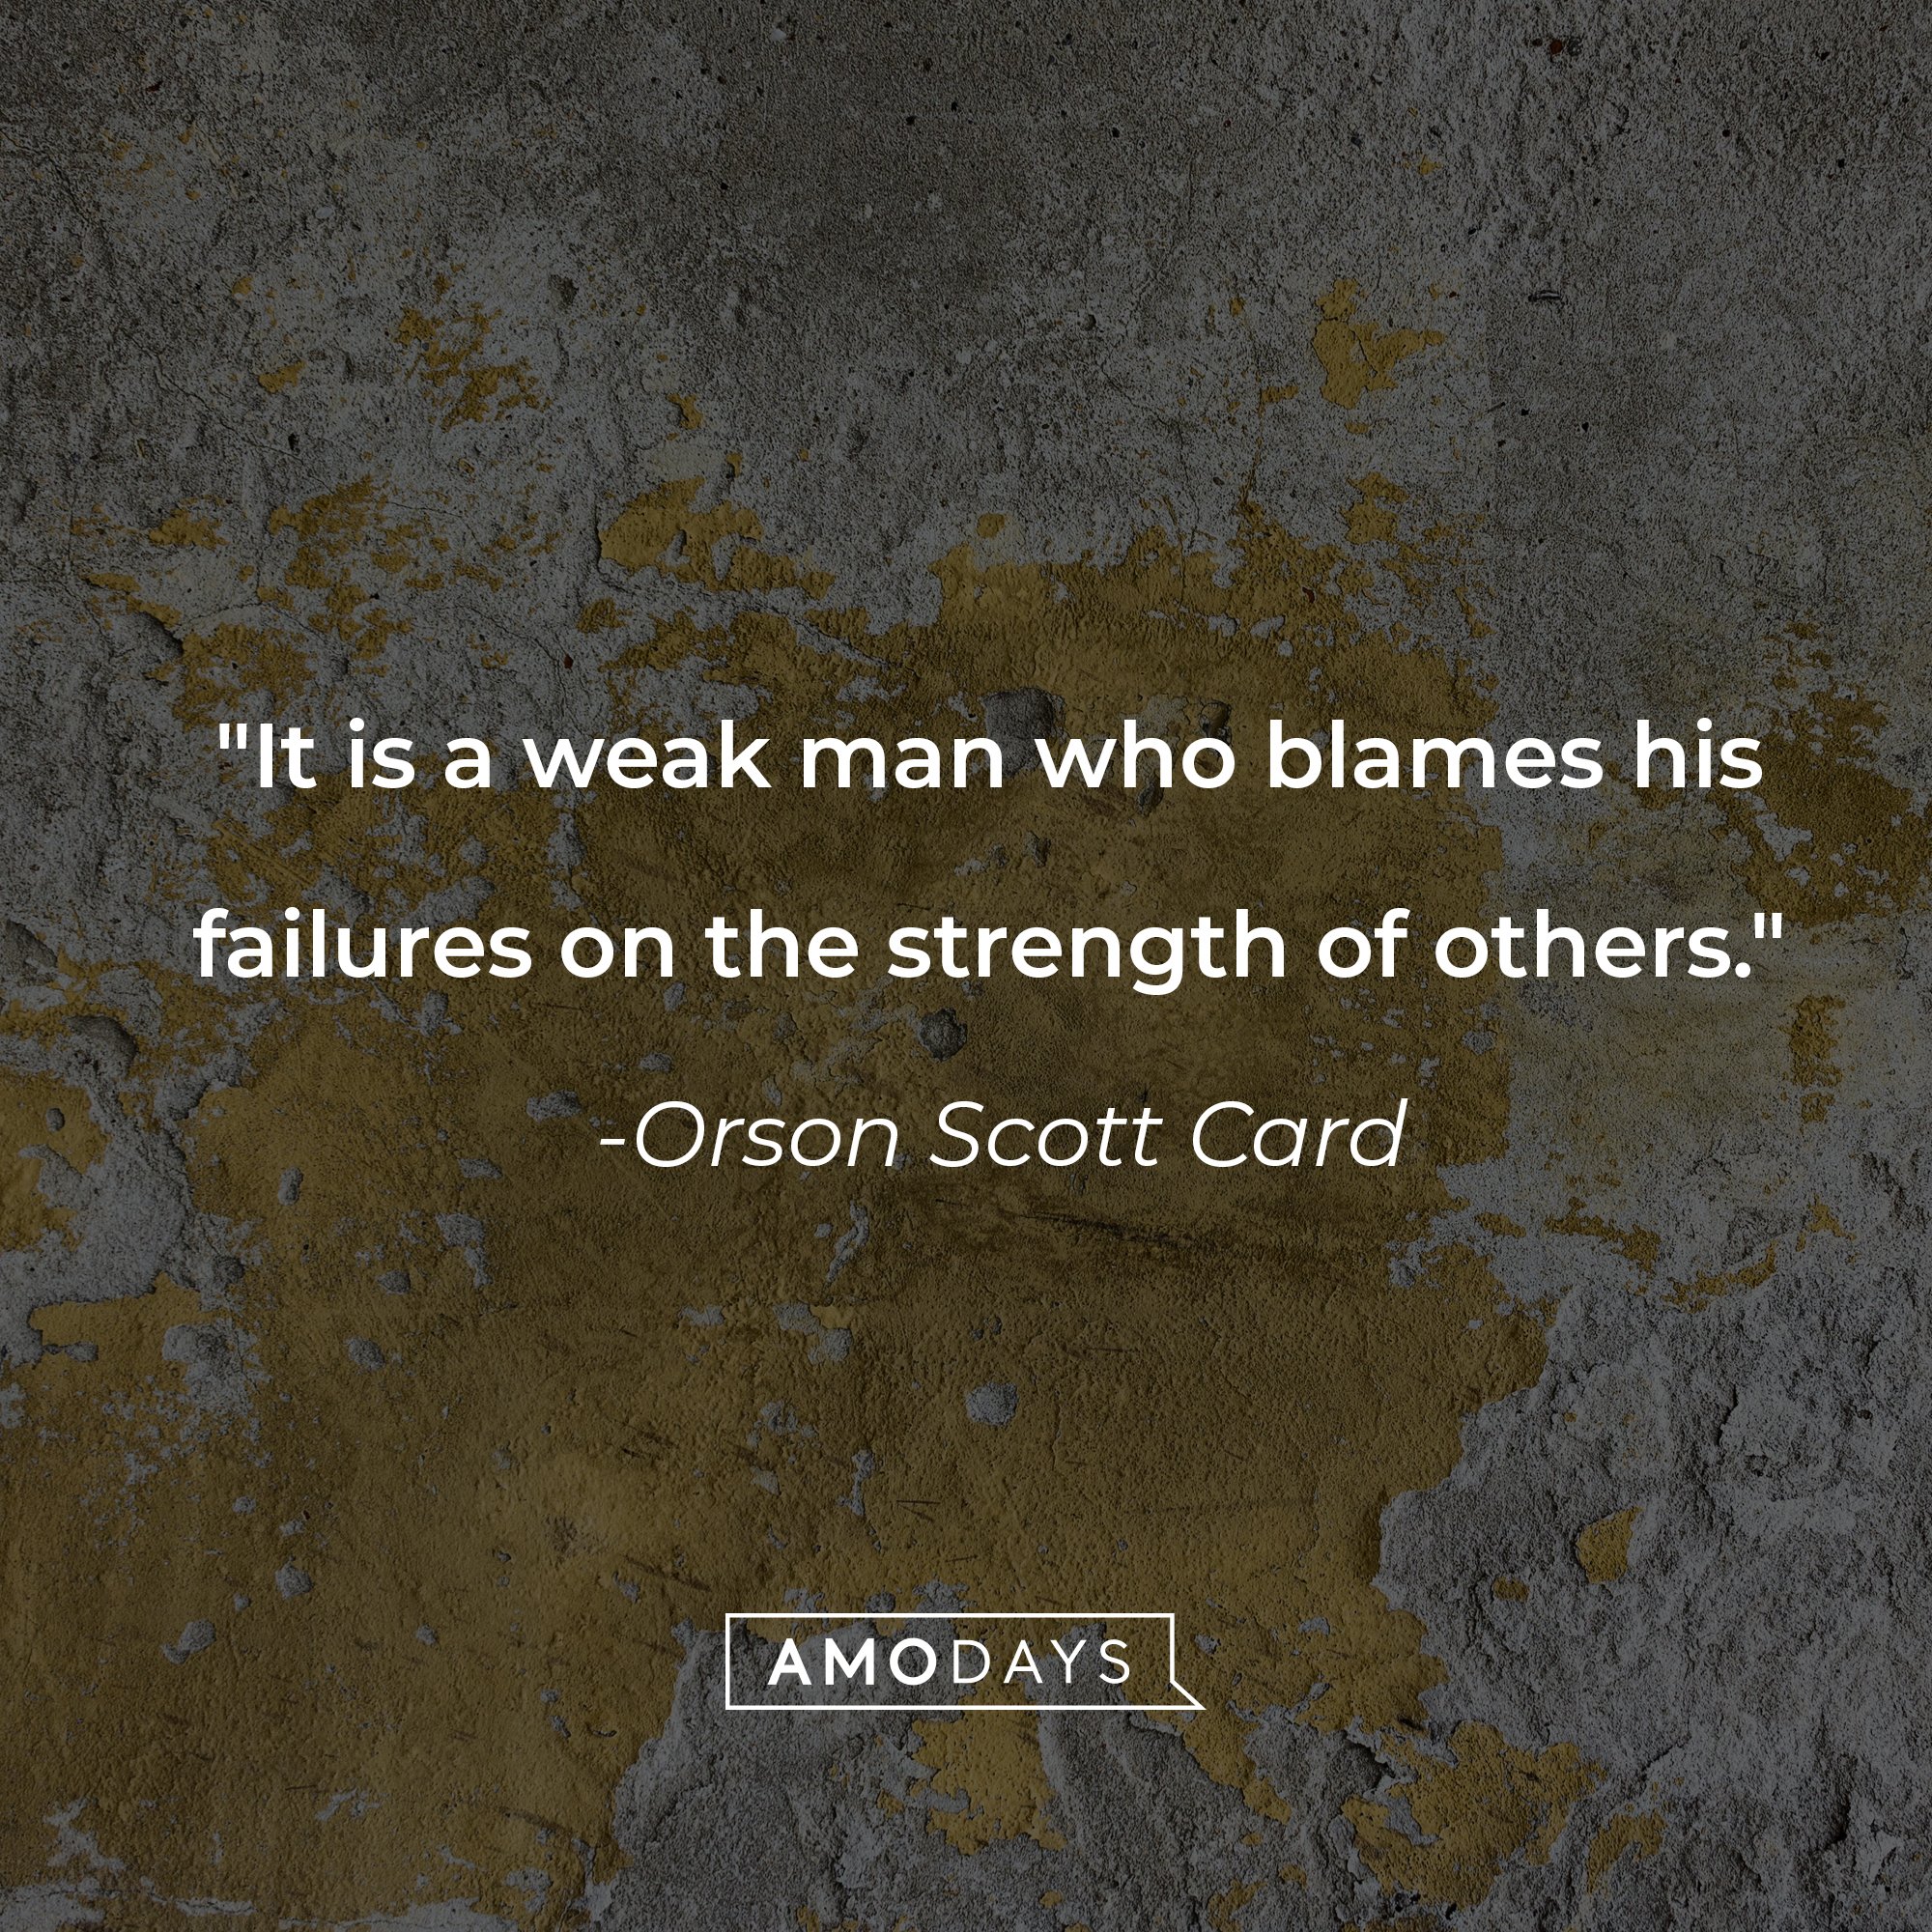 Orson Scott Card's quote: "It is a weak man who blames his failures on the strength of others." | Image: AmoDays